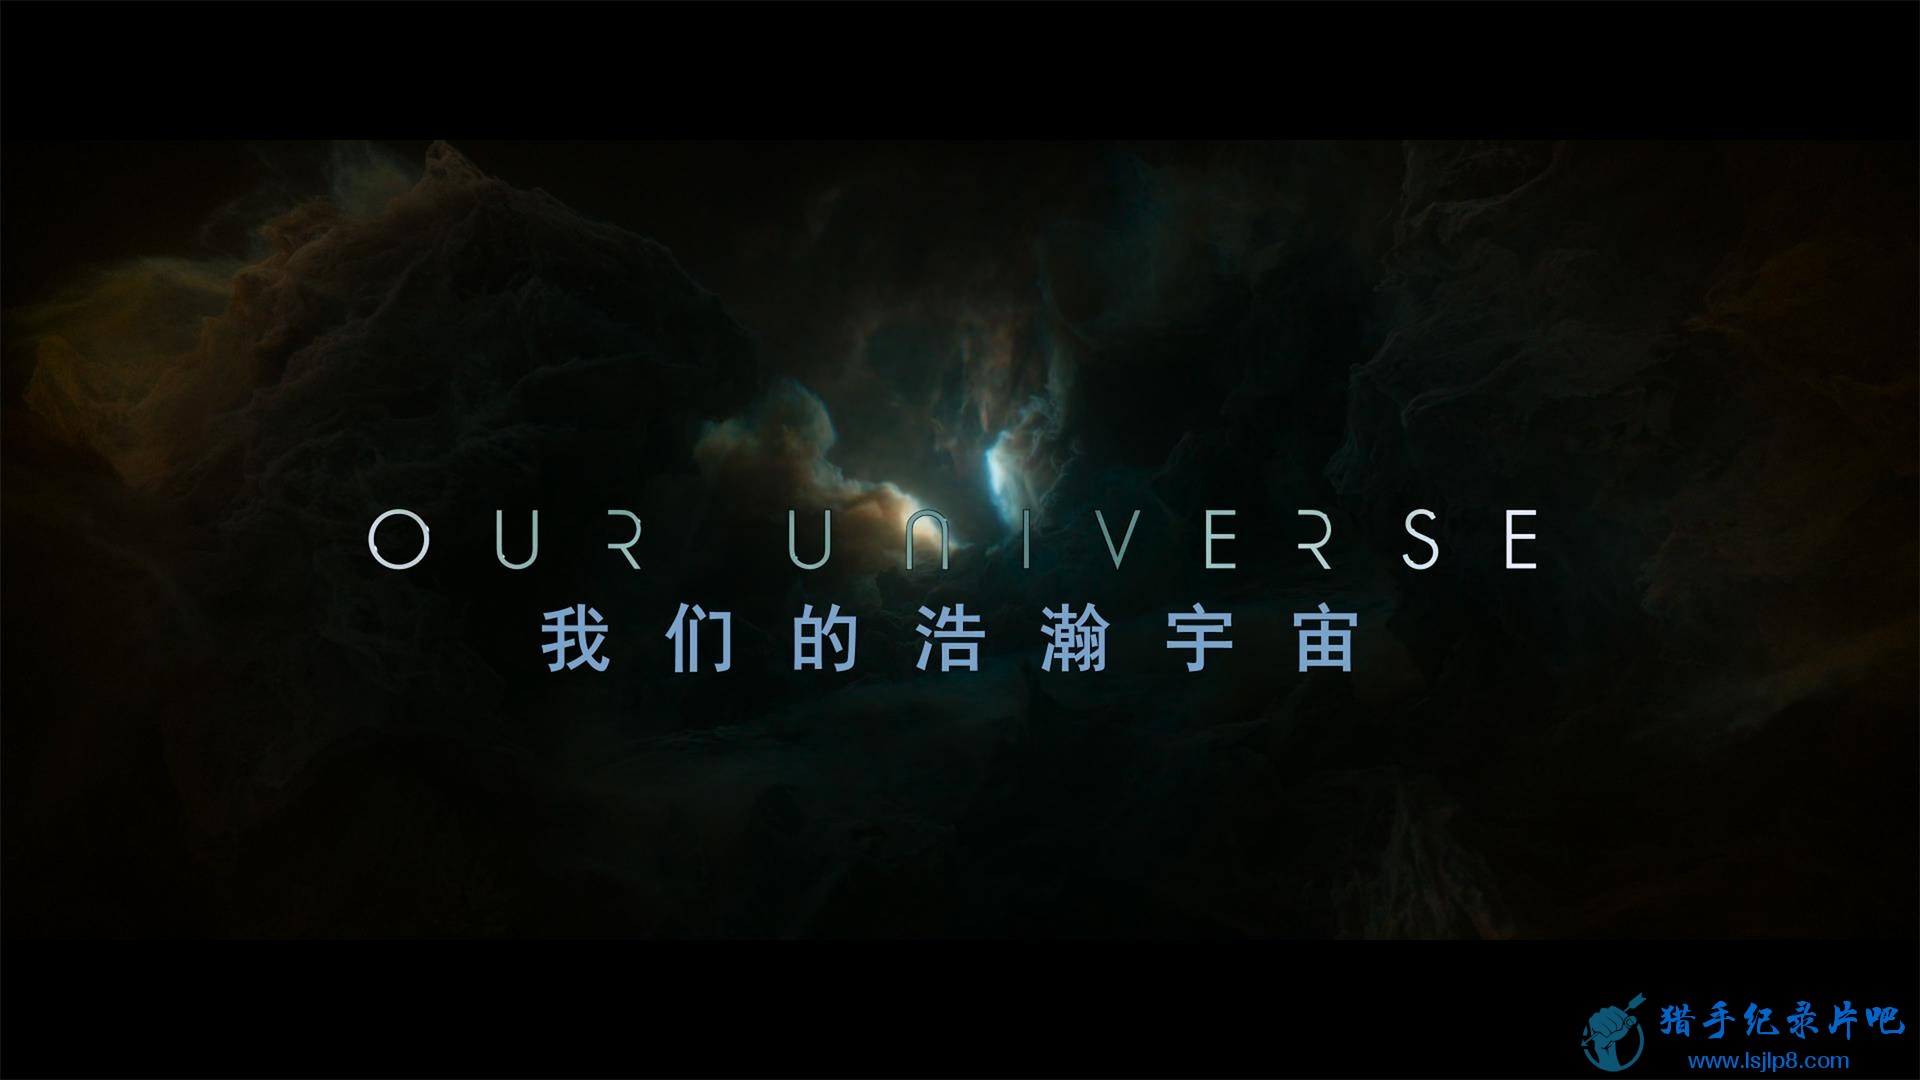 Our.Universe.S01E01.Chasing.Starlight.2160p.NF.WEB-DL.DDP5.1.Atmos.1.jpg